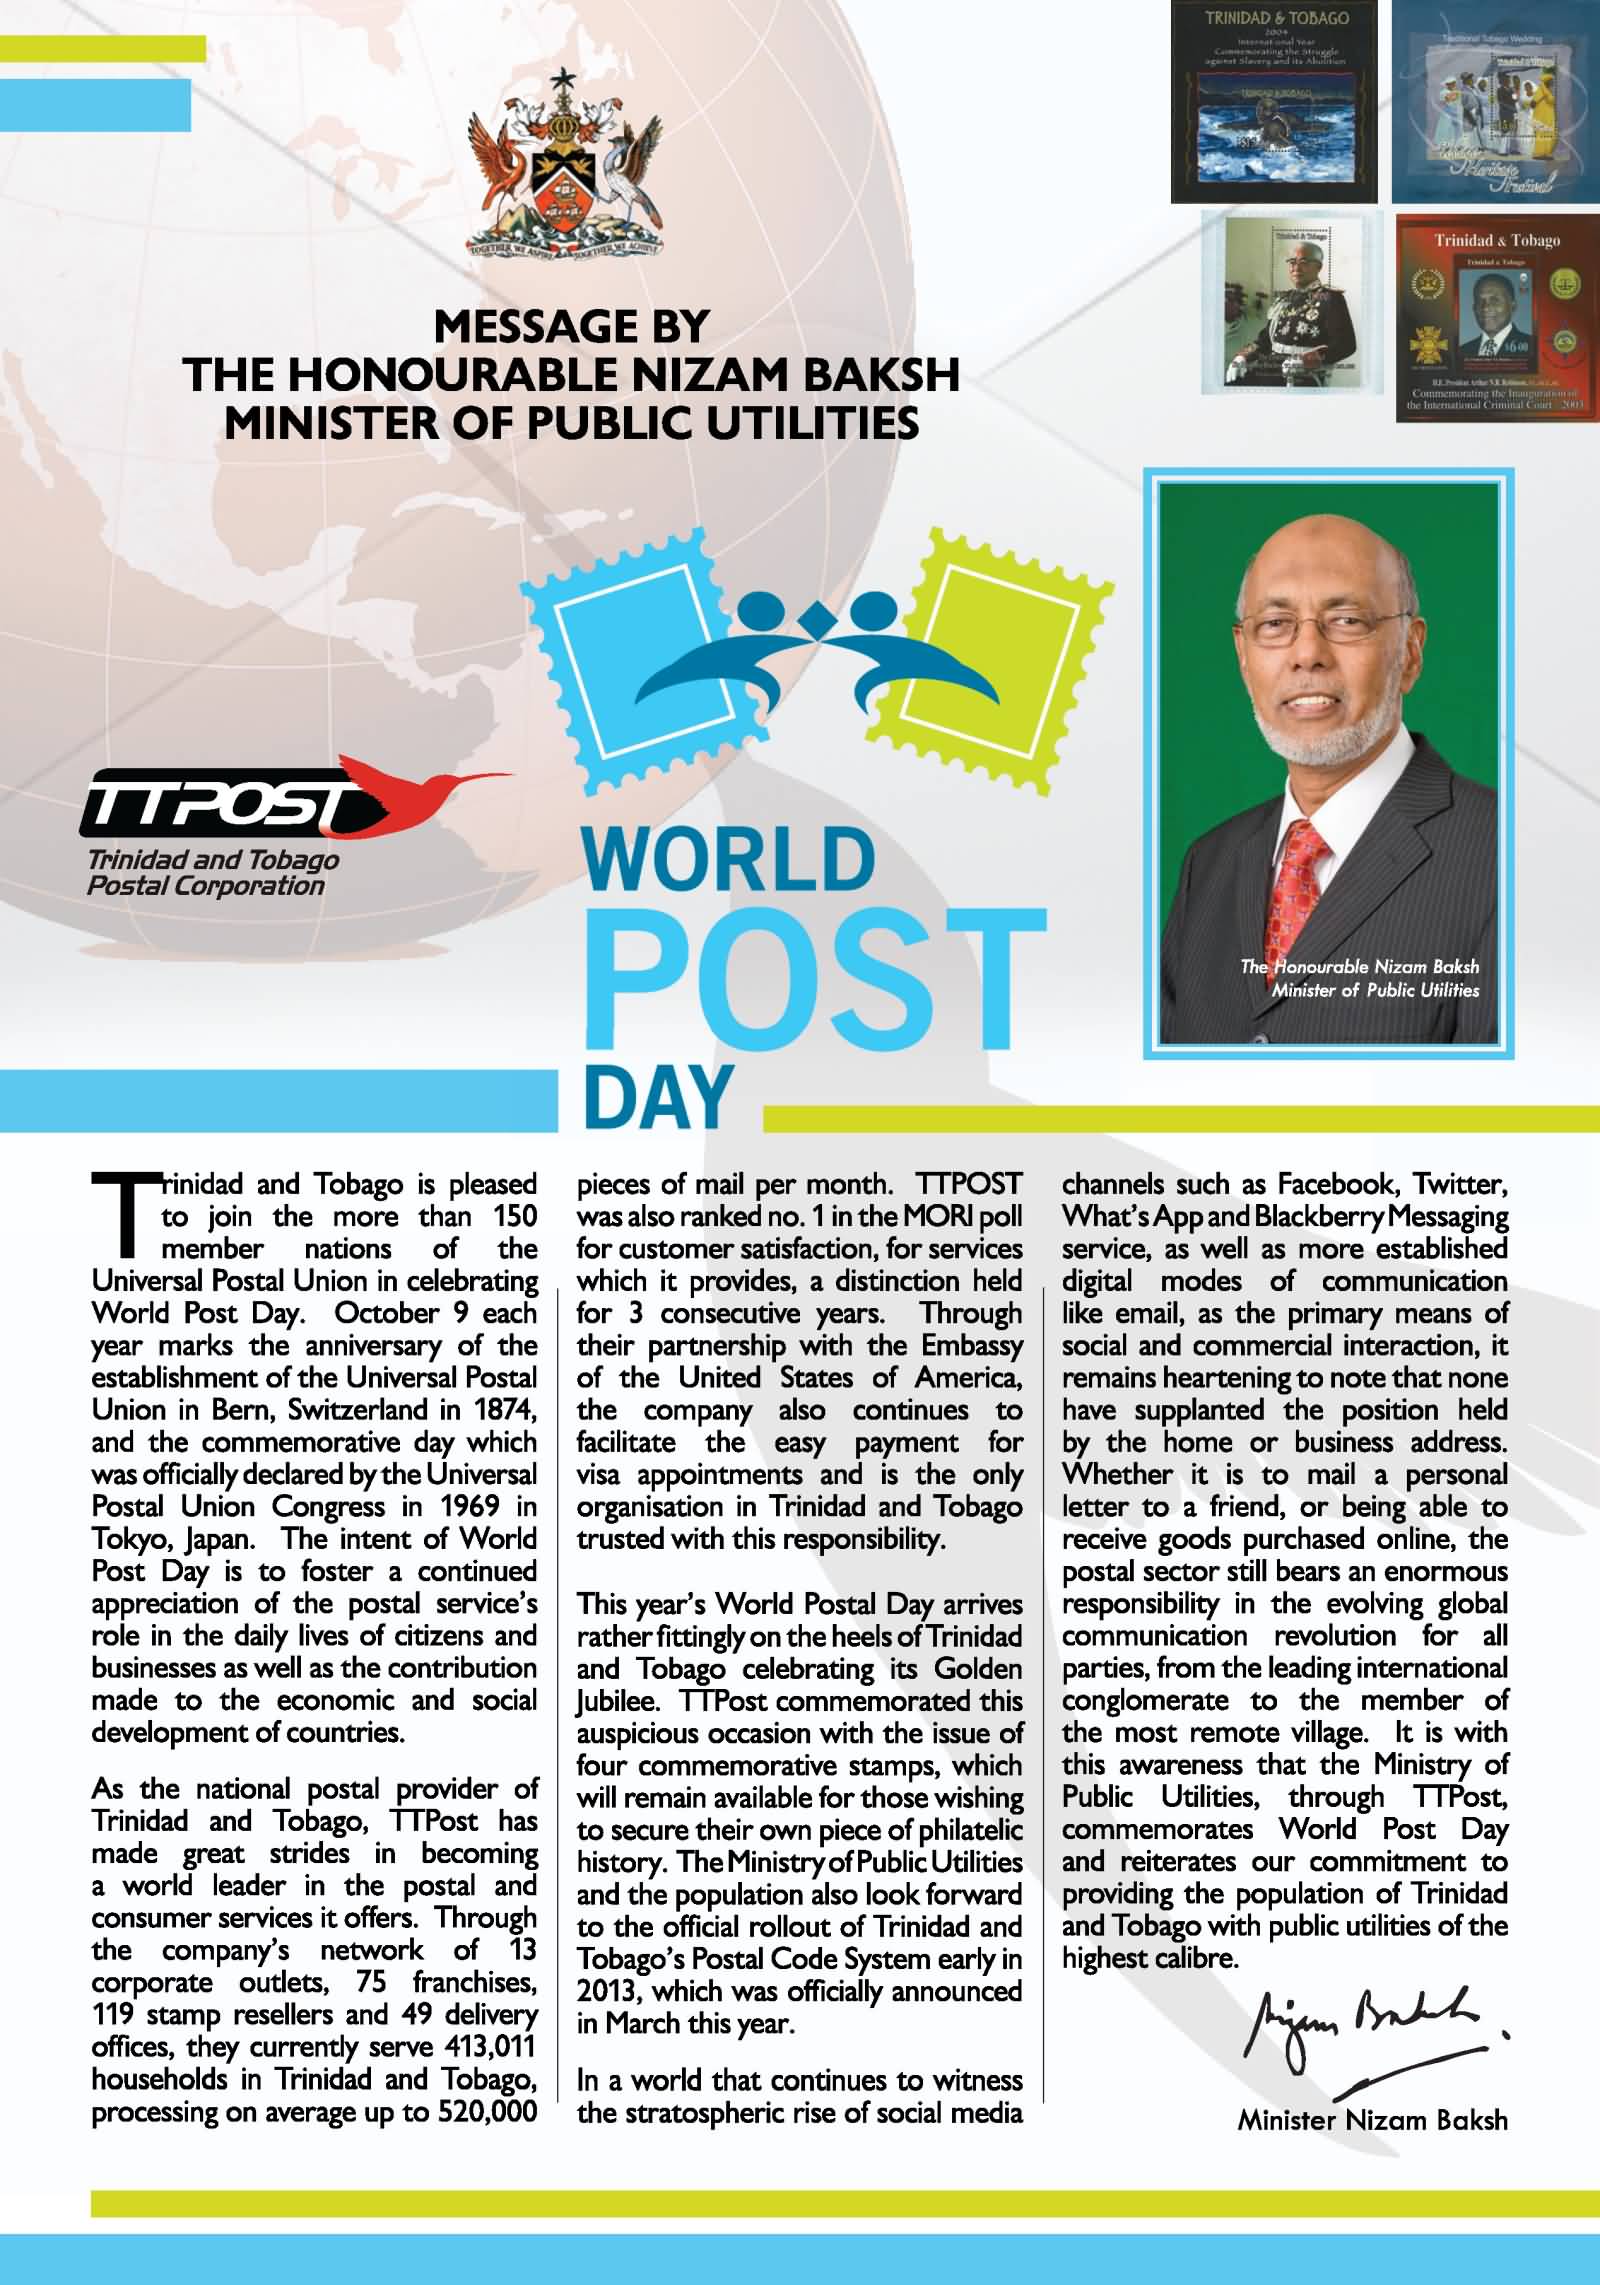 Message By Honourable Nizam Baksh Minister Of Public Unilities On World Post Day